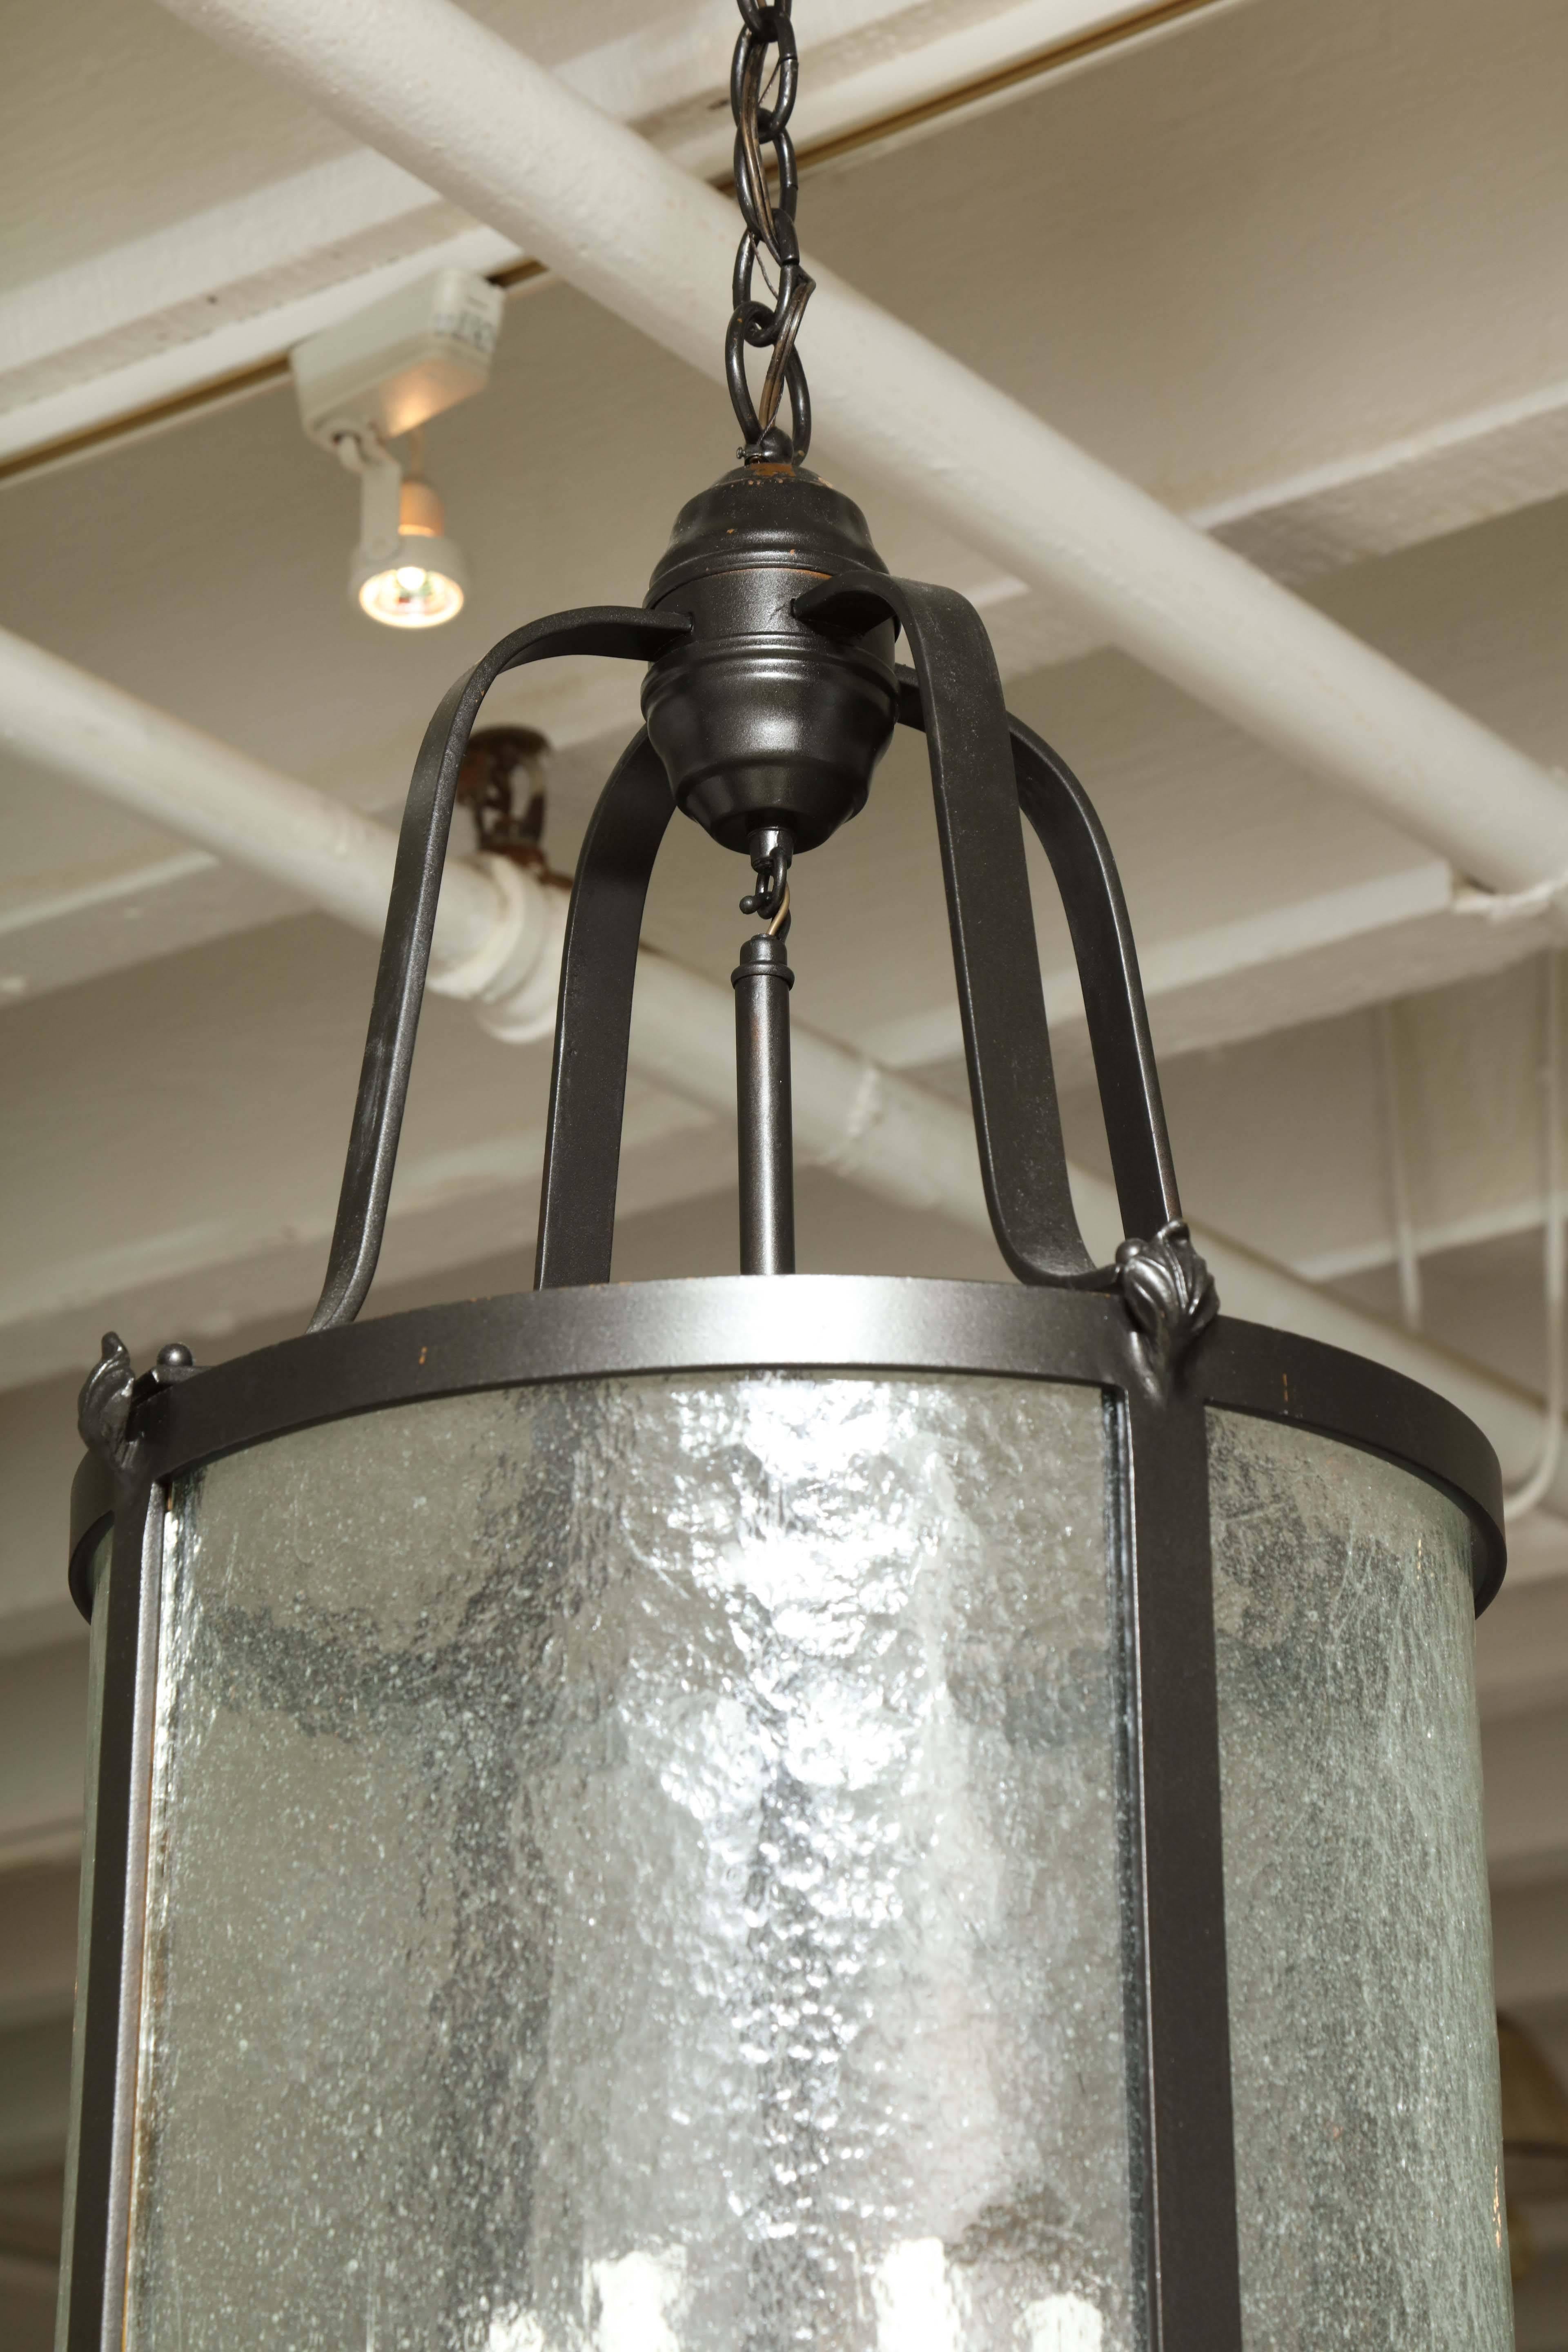 Mid-20th Century oil-rubbed bronze and glass chandelier.